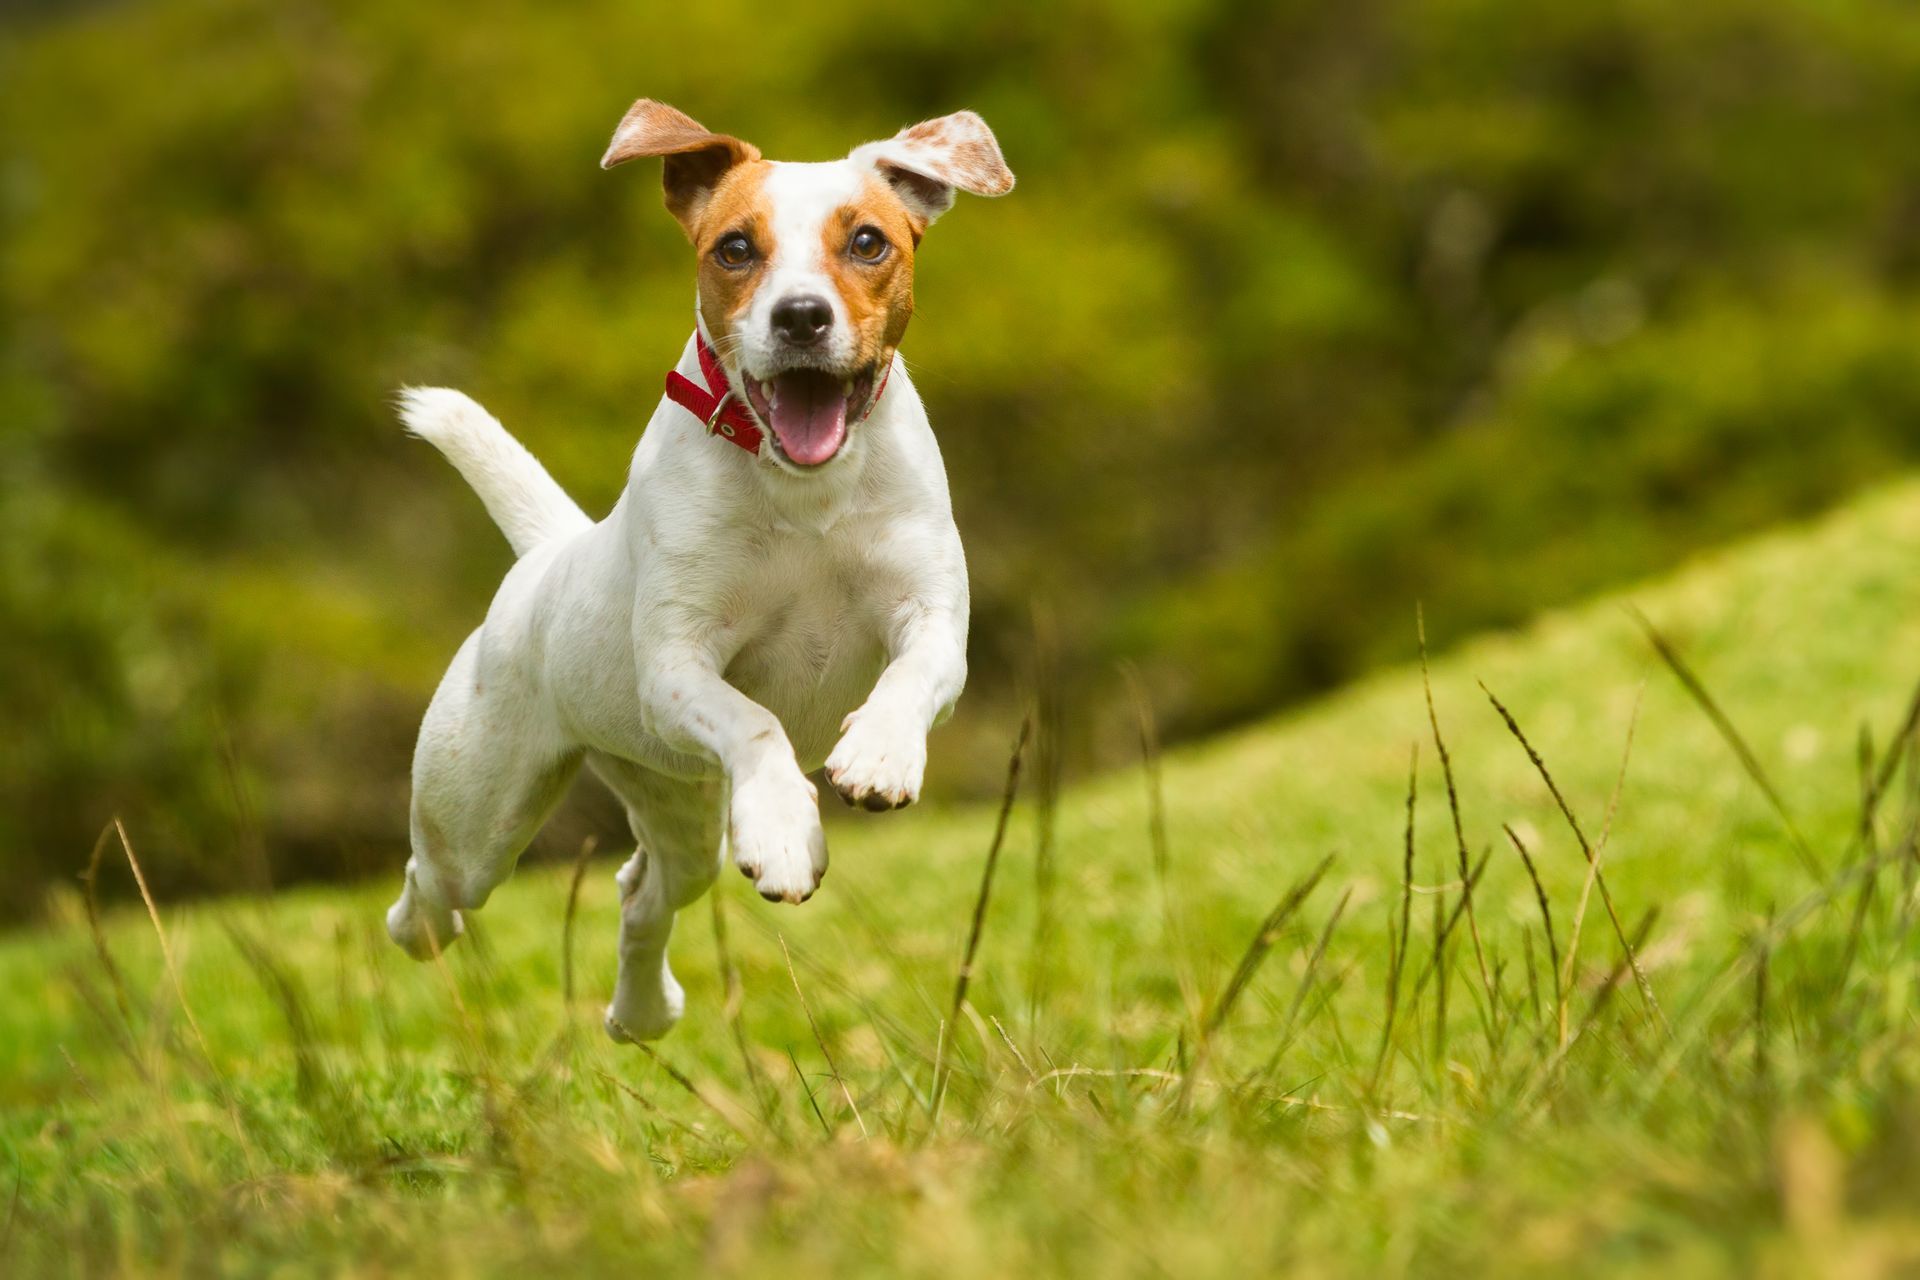 If you want your dog to run freely, you need a reliable recall to ensure everyones safety.